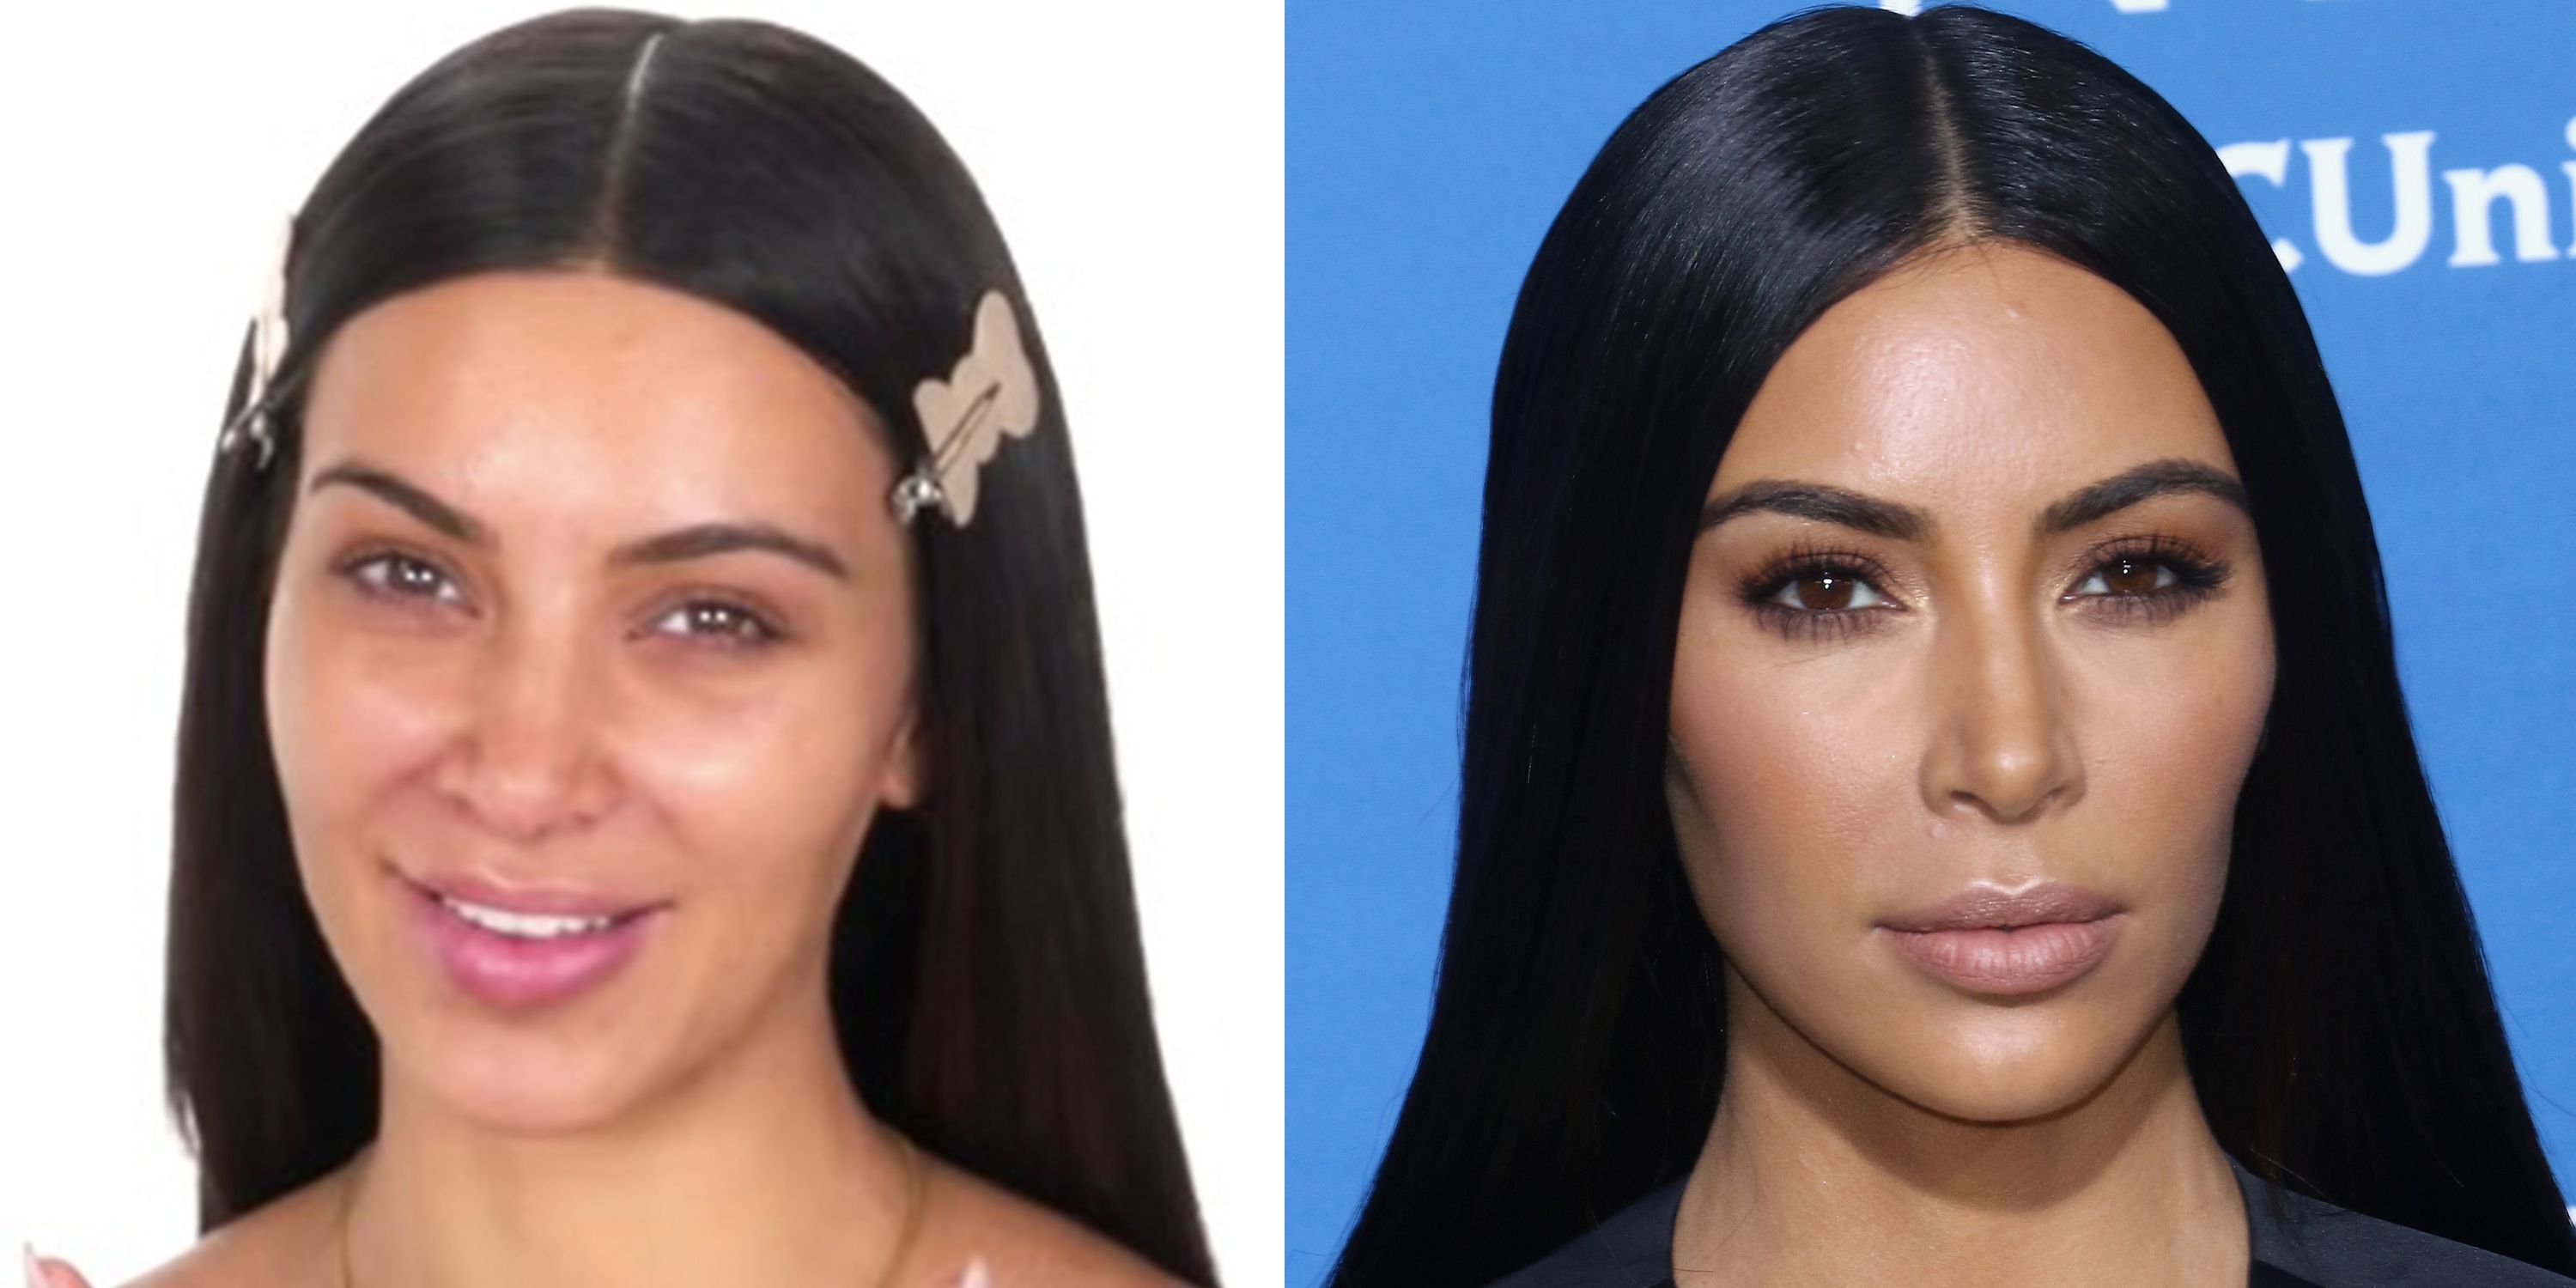 Kim kardashian's makeup artist shares the exact products she wore to t...